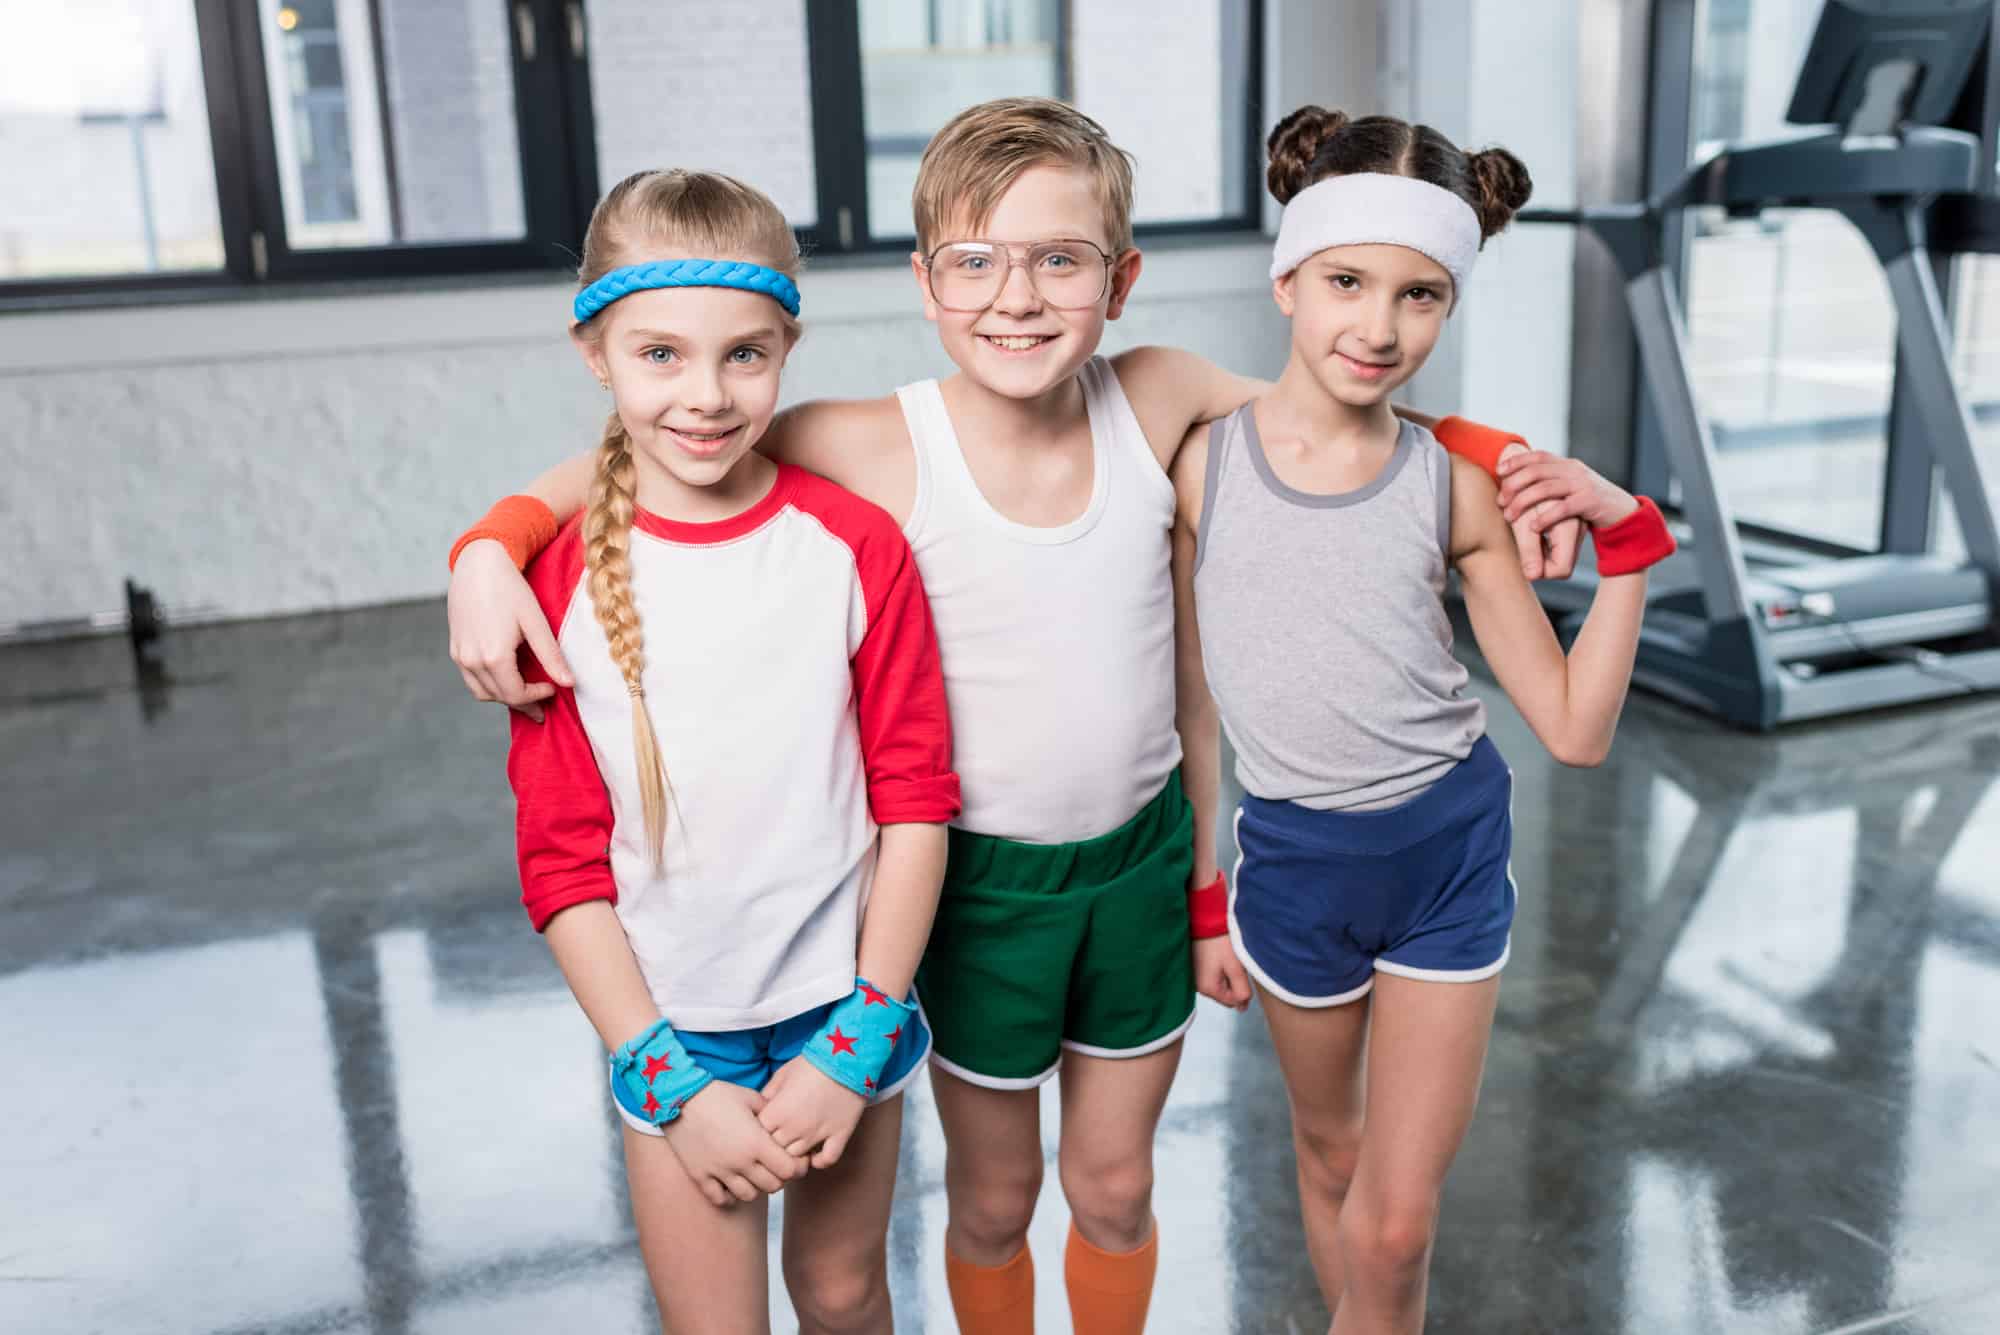 A young white boy with his arms around the shoulders of two white girls. They are in a gym dressed in shorts and cotton shirts.